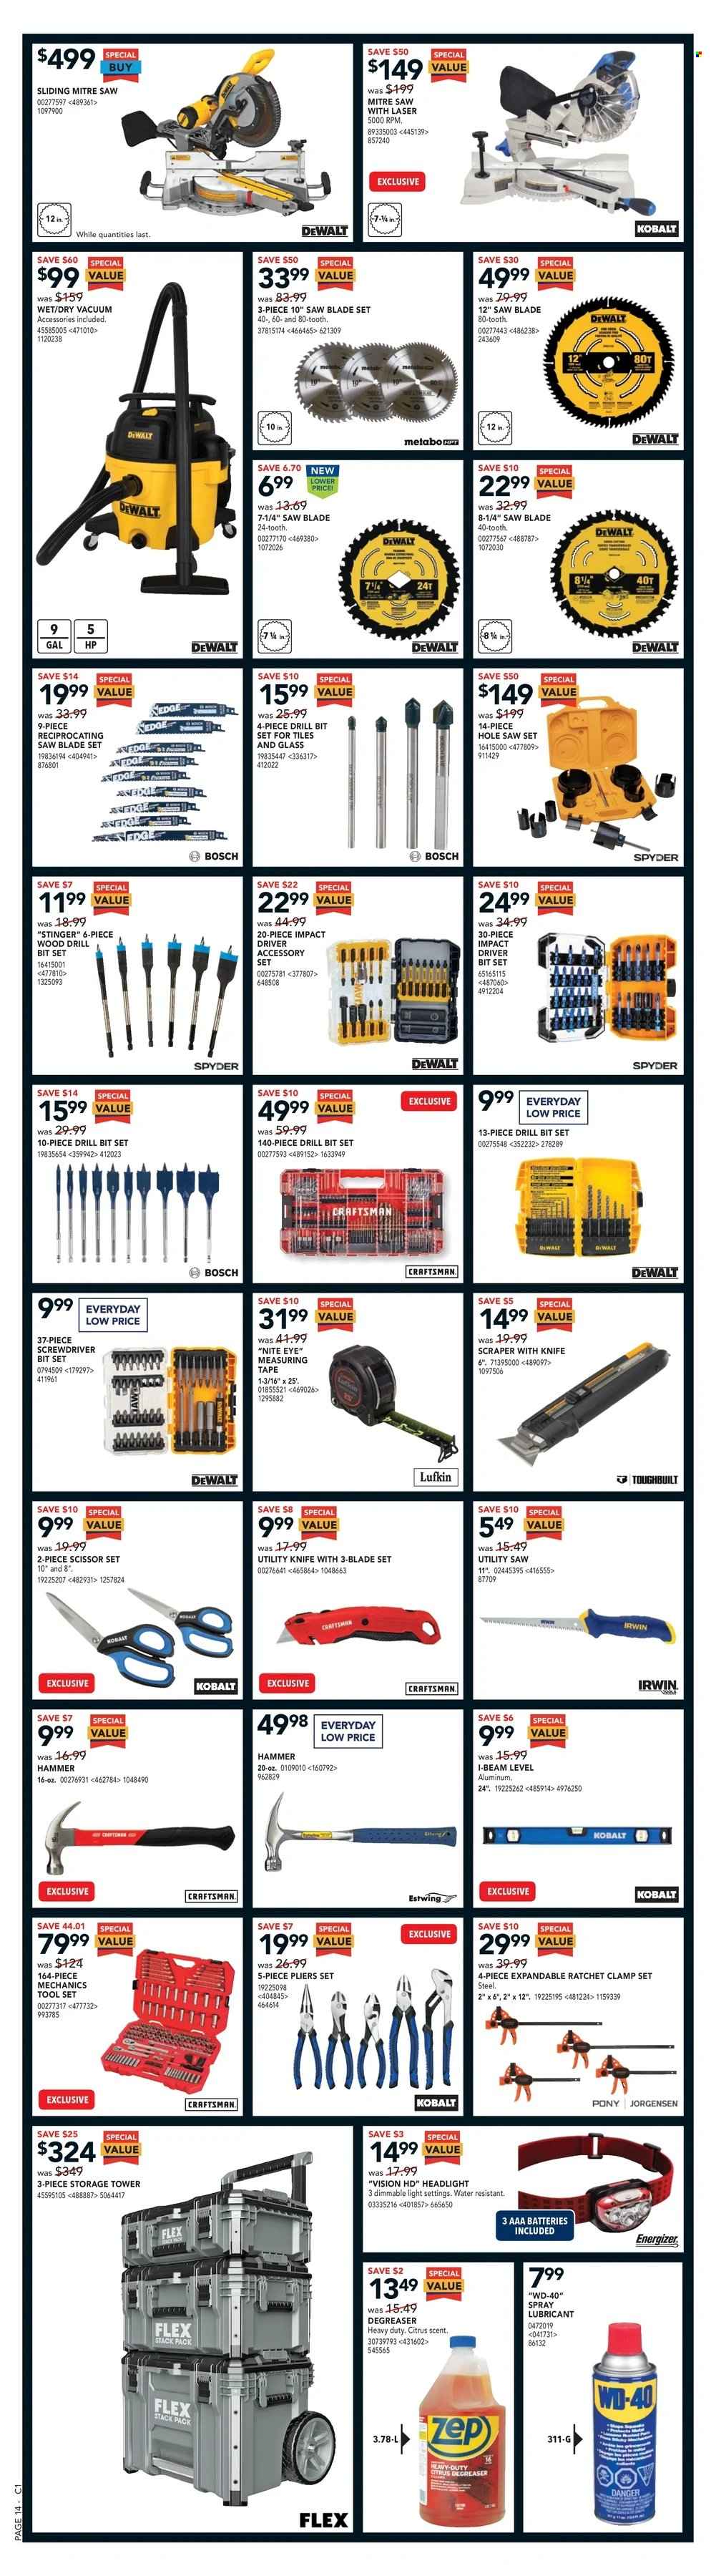 thumbnail - RONA Flyer - November 24, 2022 - November 30, 2022 - Sales products - scissors, AAA batteries, Bosch, vacuum cleaner, DeWALT, impact driver, hammer, drill bit set, Craftsman, reciprocating saw blade, screwdriver bits, pliers, tool set, measuring tape, lubricant, mechanic's tools, headlamp, clamp set, WD-40, utility knife, Energizer. Page 13.